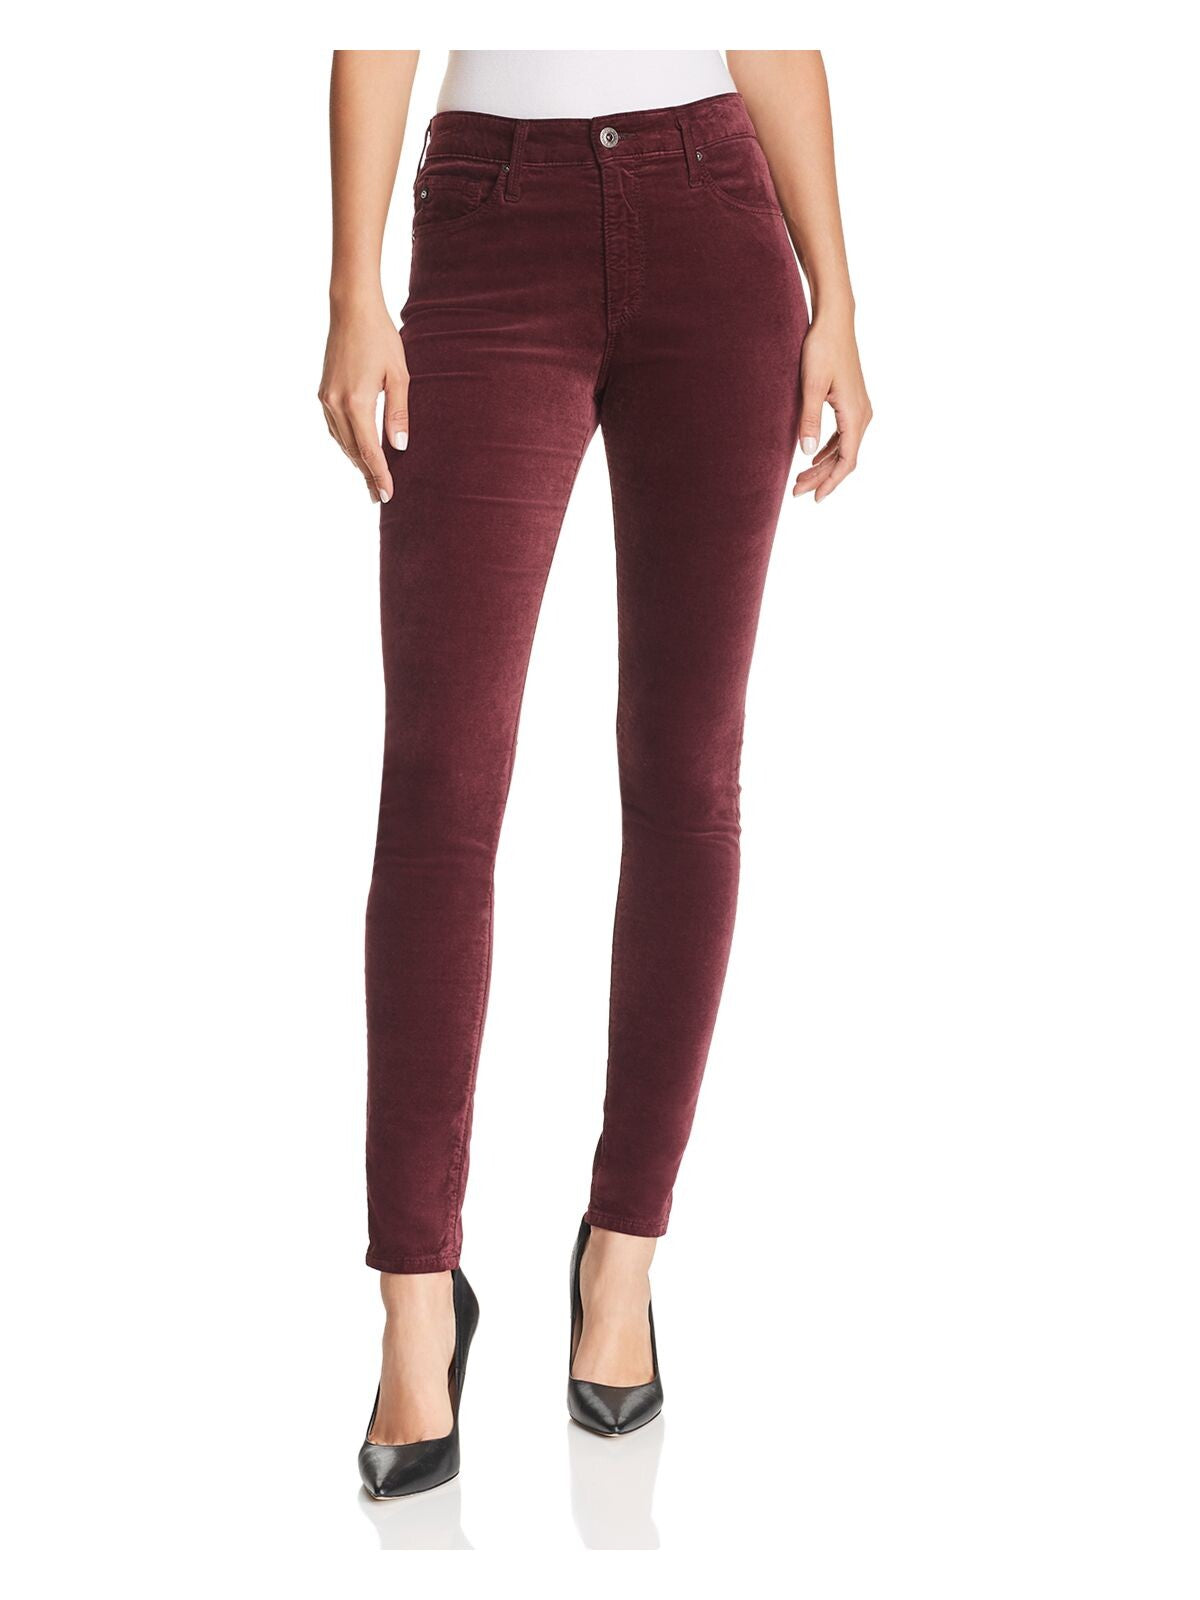 ADRIANO GOLDSCHMIED Womens Maroon Pocketed Zippered Skinny Jeans 25 R